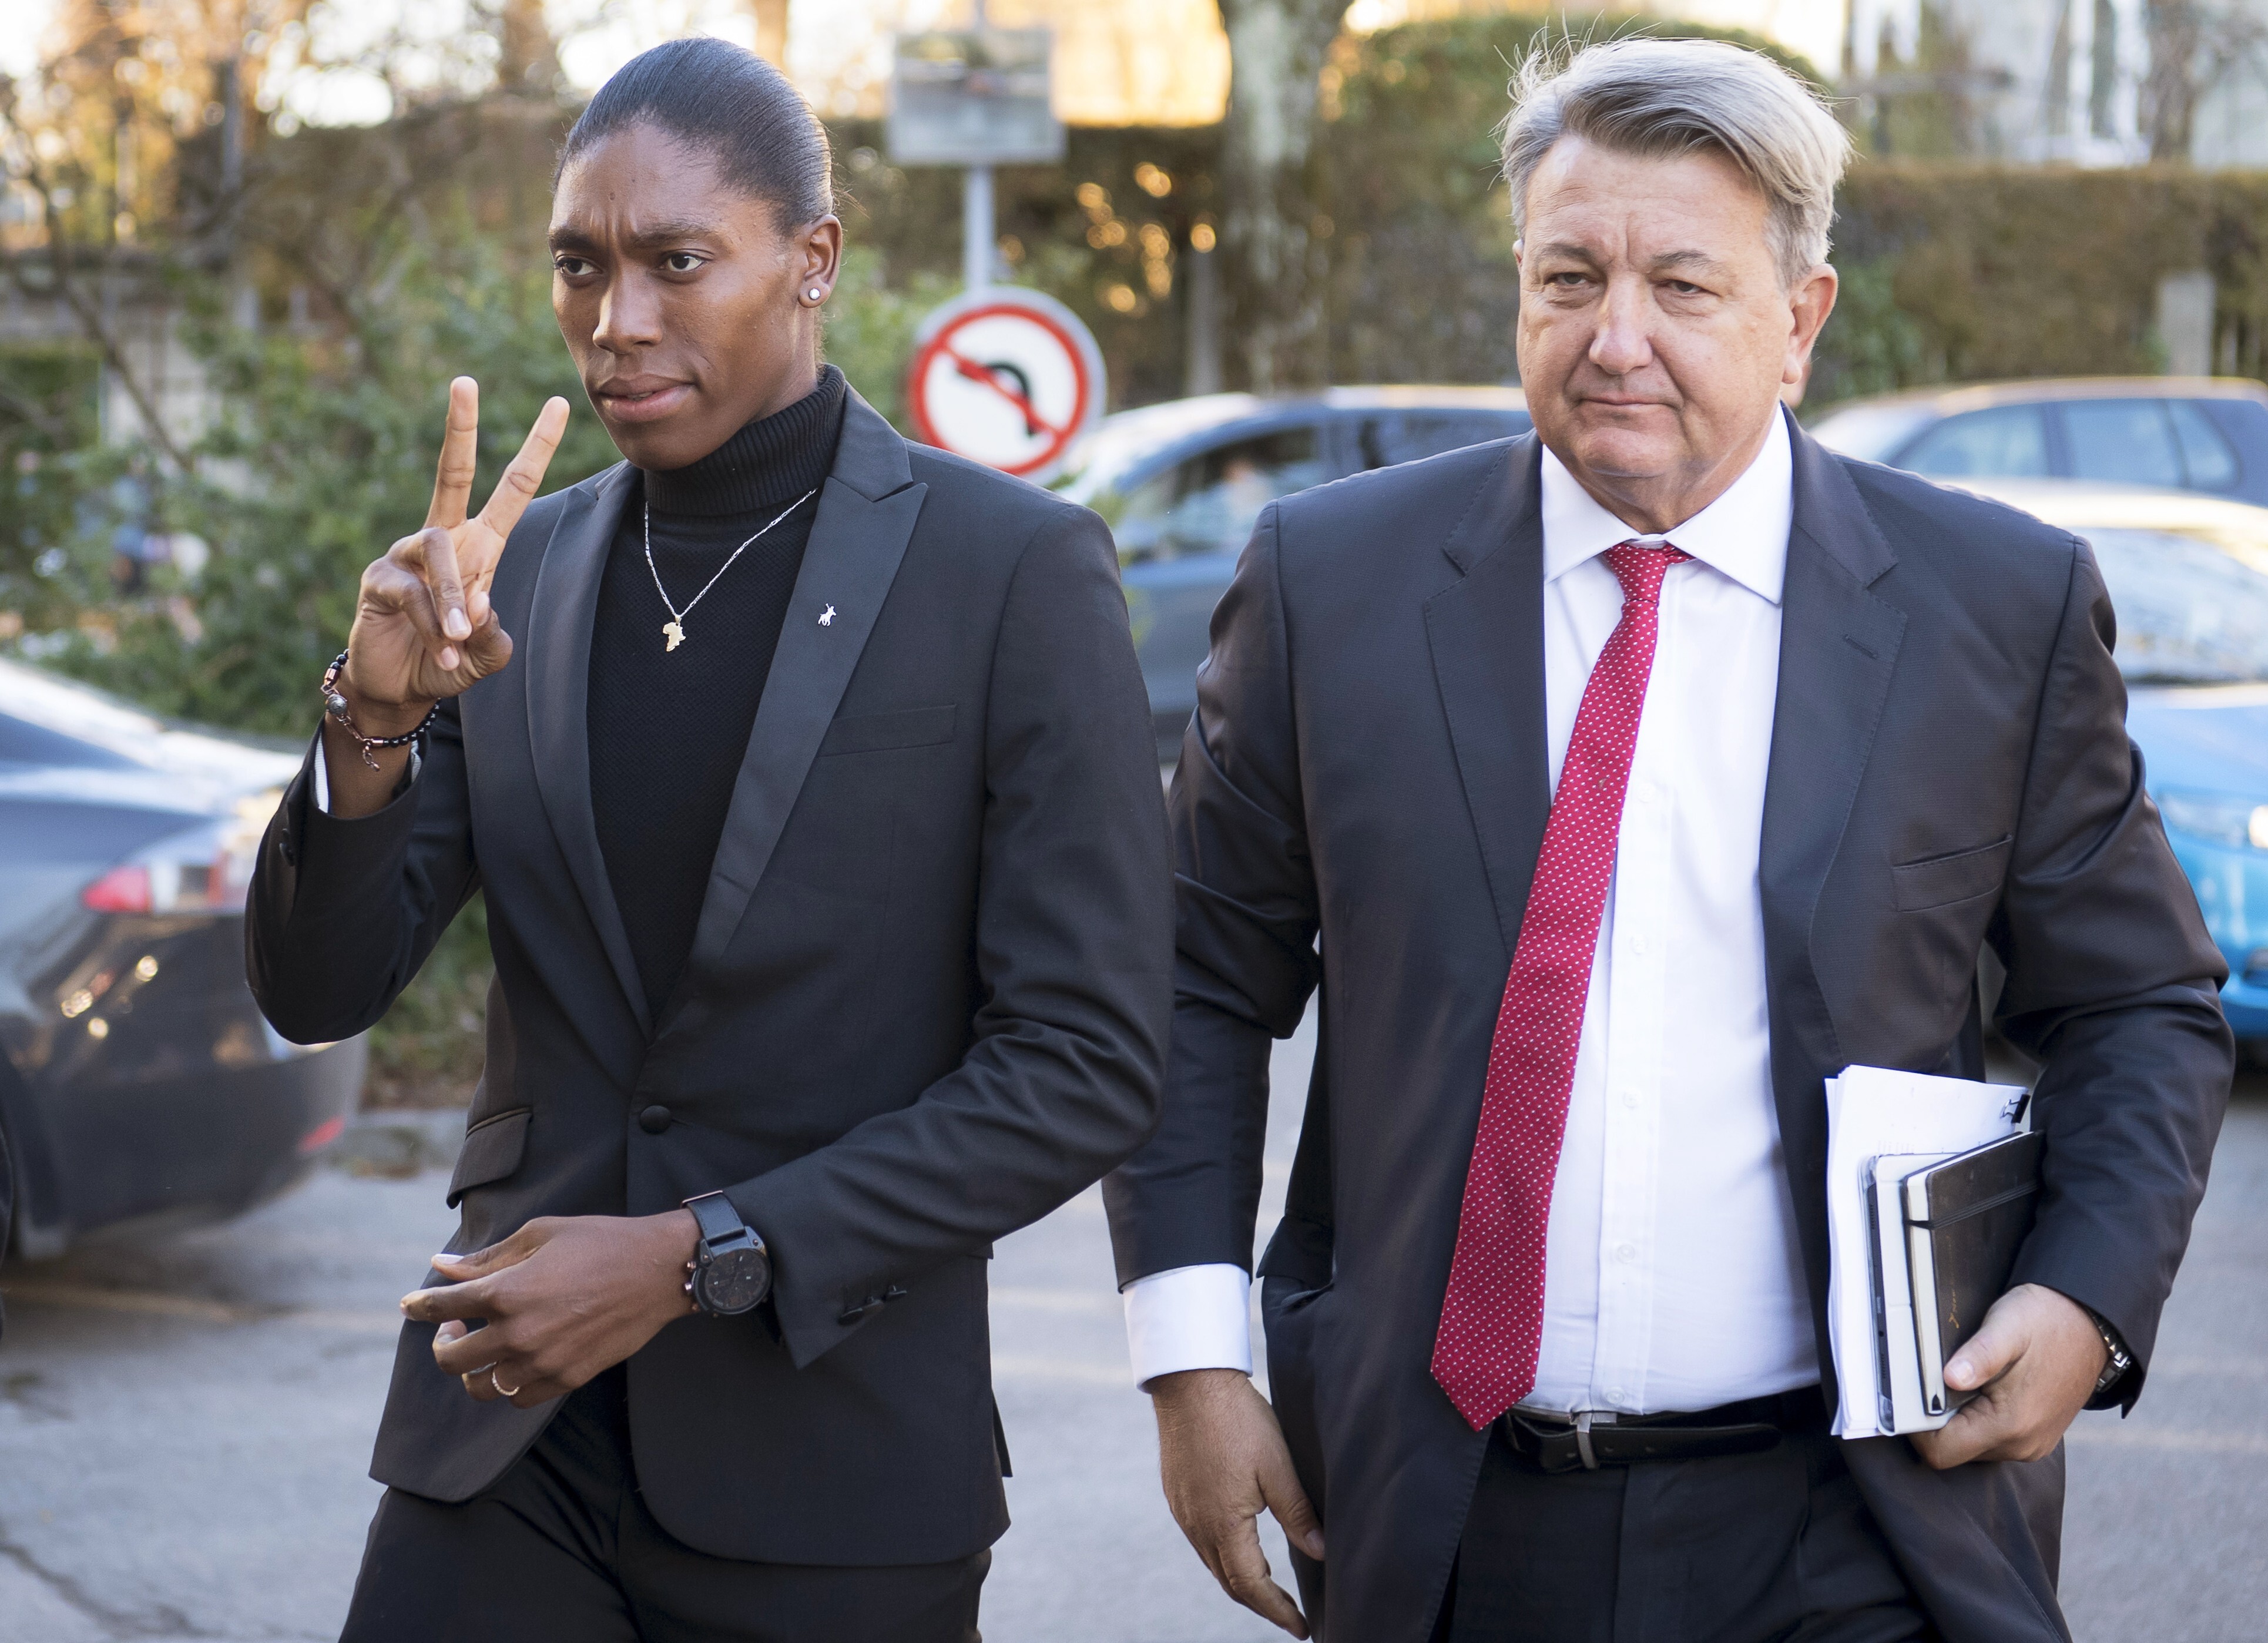 South African runner Caster Semenya arrives with her lawyer Gregory Nott for her hearing at the international Court of Arbitration for Sport (CAS) in Lausanne, Switzerland in 2019. Photo: EPA